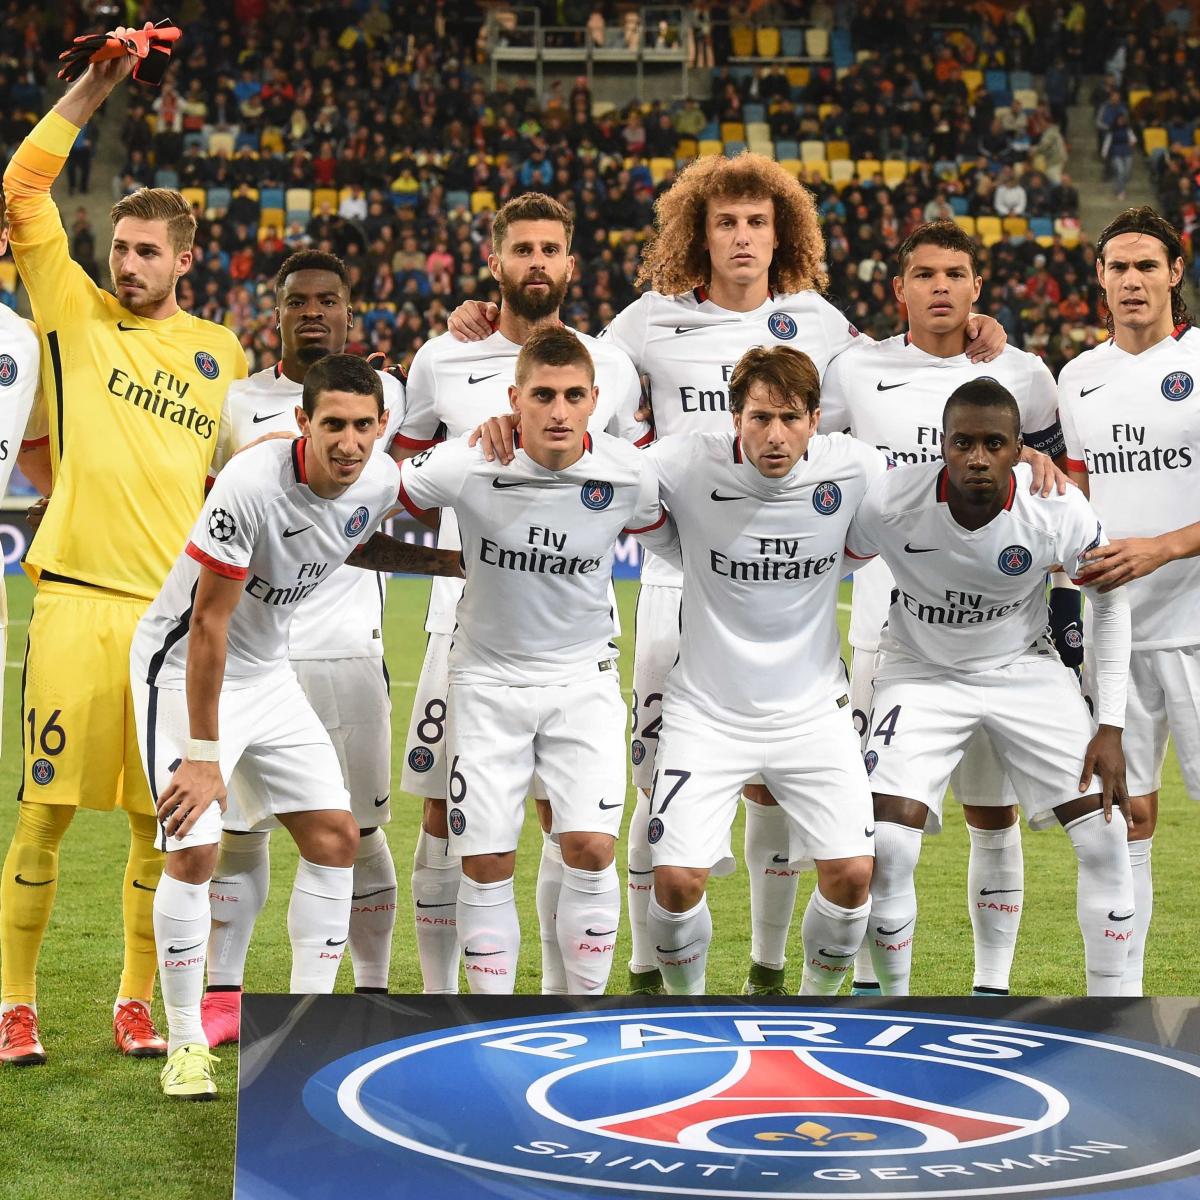 PSG - Paris Saint-Germain - 🔝📊 For the 1️⃣5️⃣th time, Paris Saint-Germain  is top of Ligue 1 at the midway point, at least 5️⃣ times more than any  other team in the